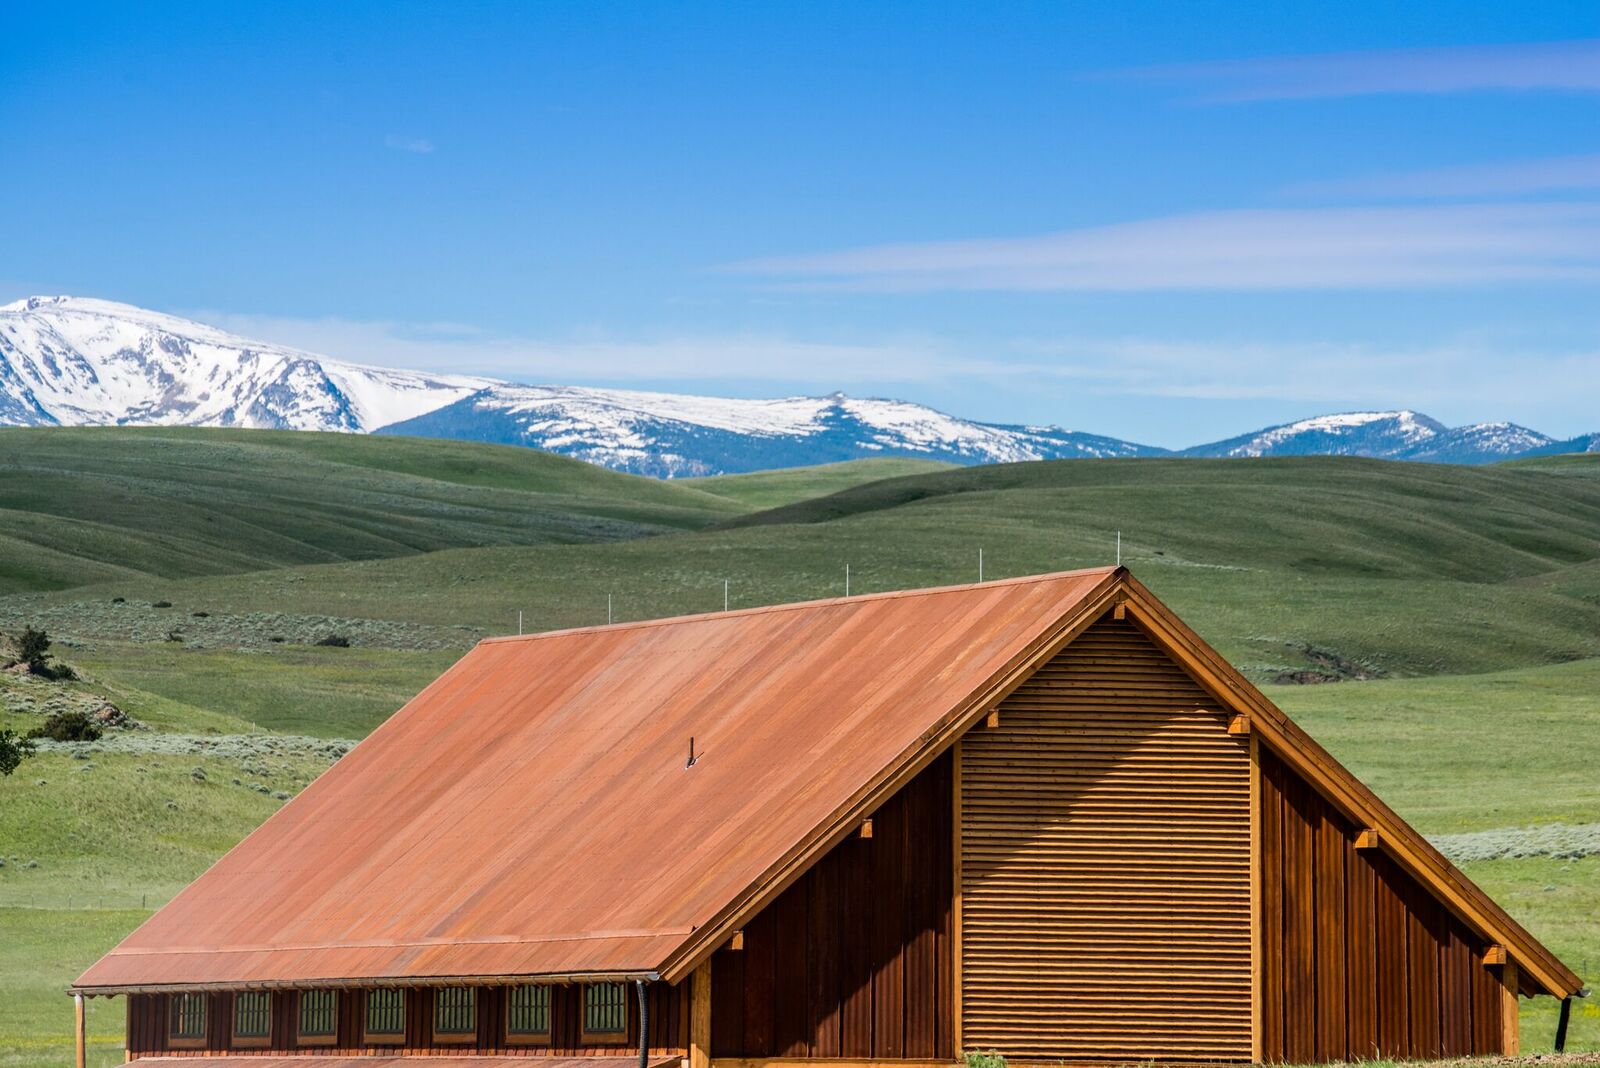 TheOlivier Music Barn at Tippet Rise Art Center. Photo by Andre Costantini. Courtesy of Tippet Rise Art Center.